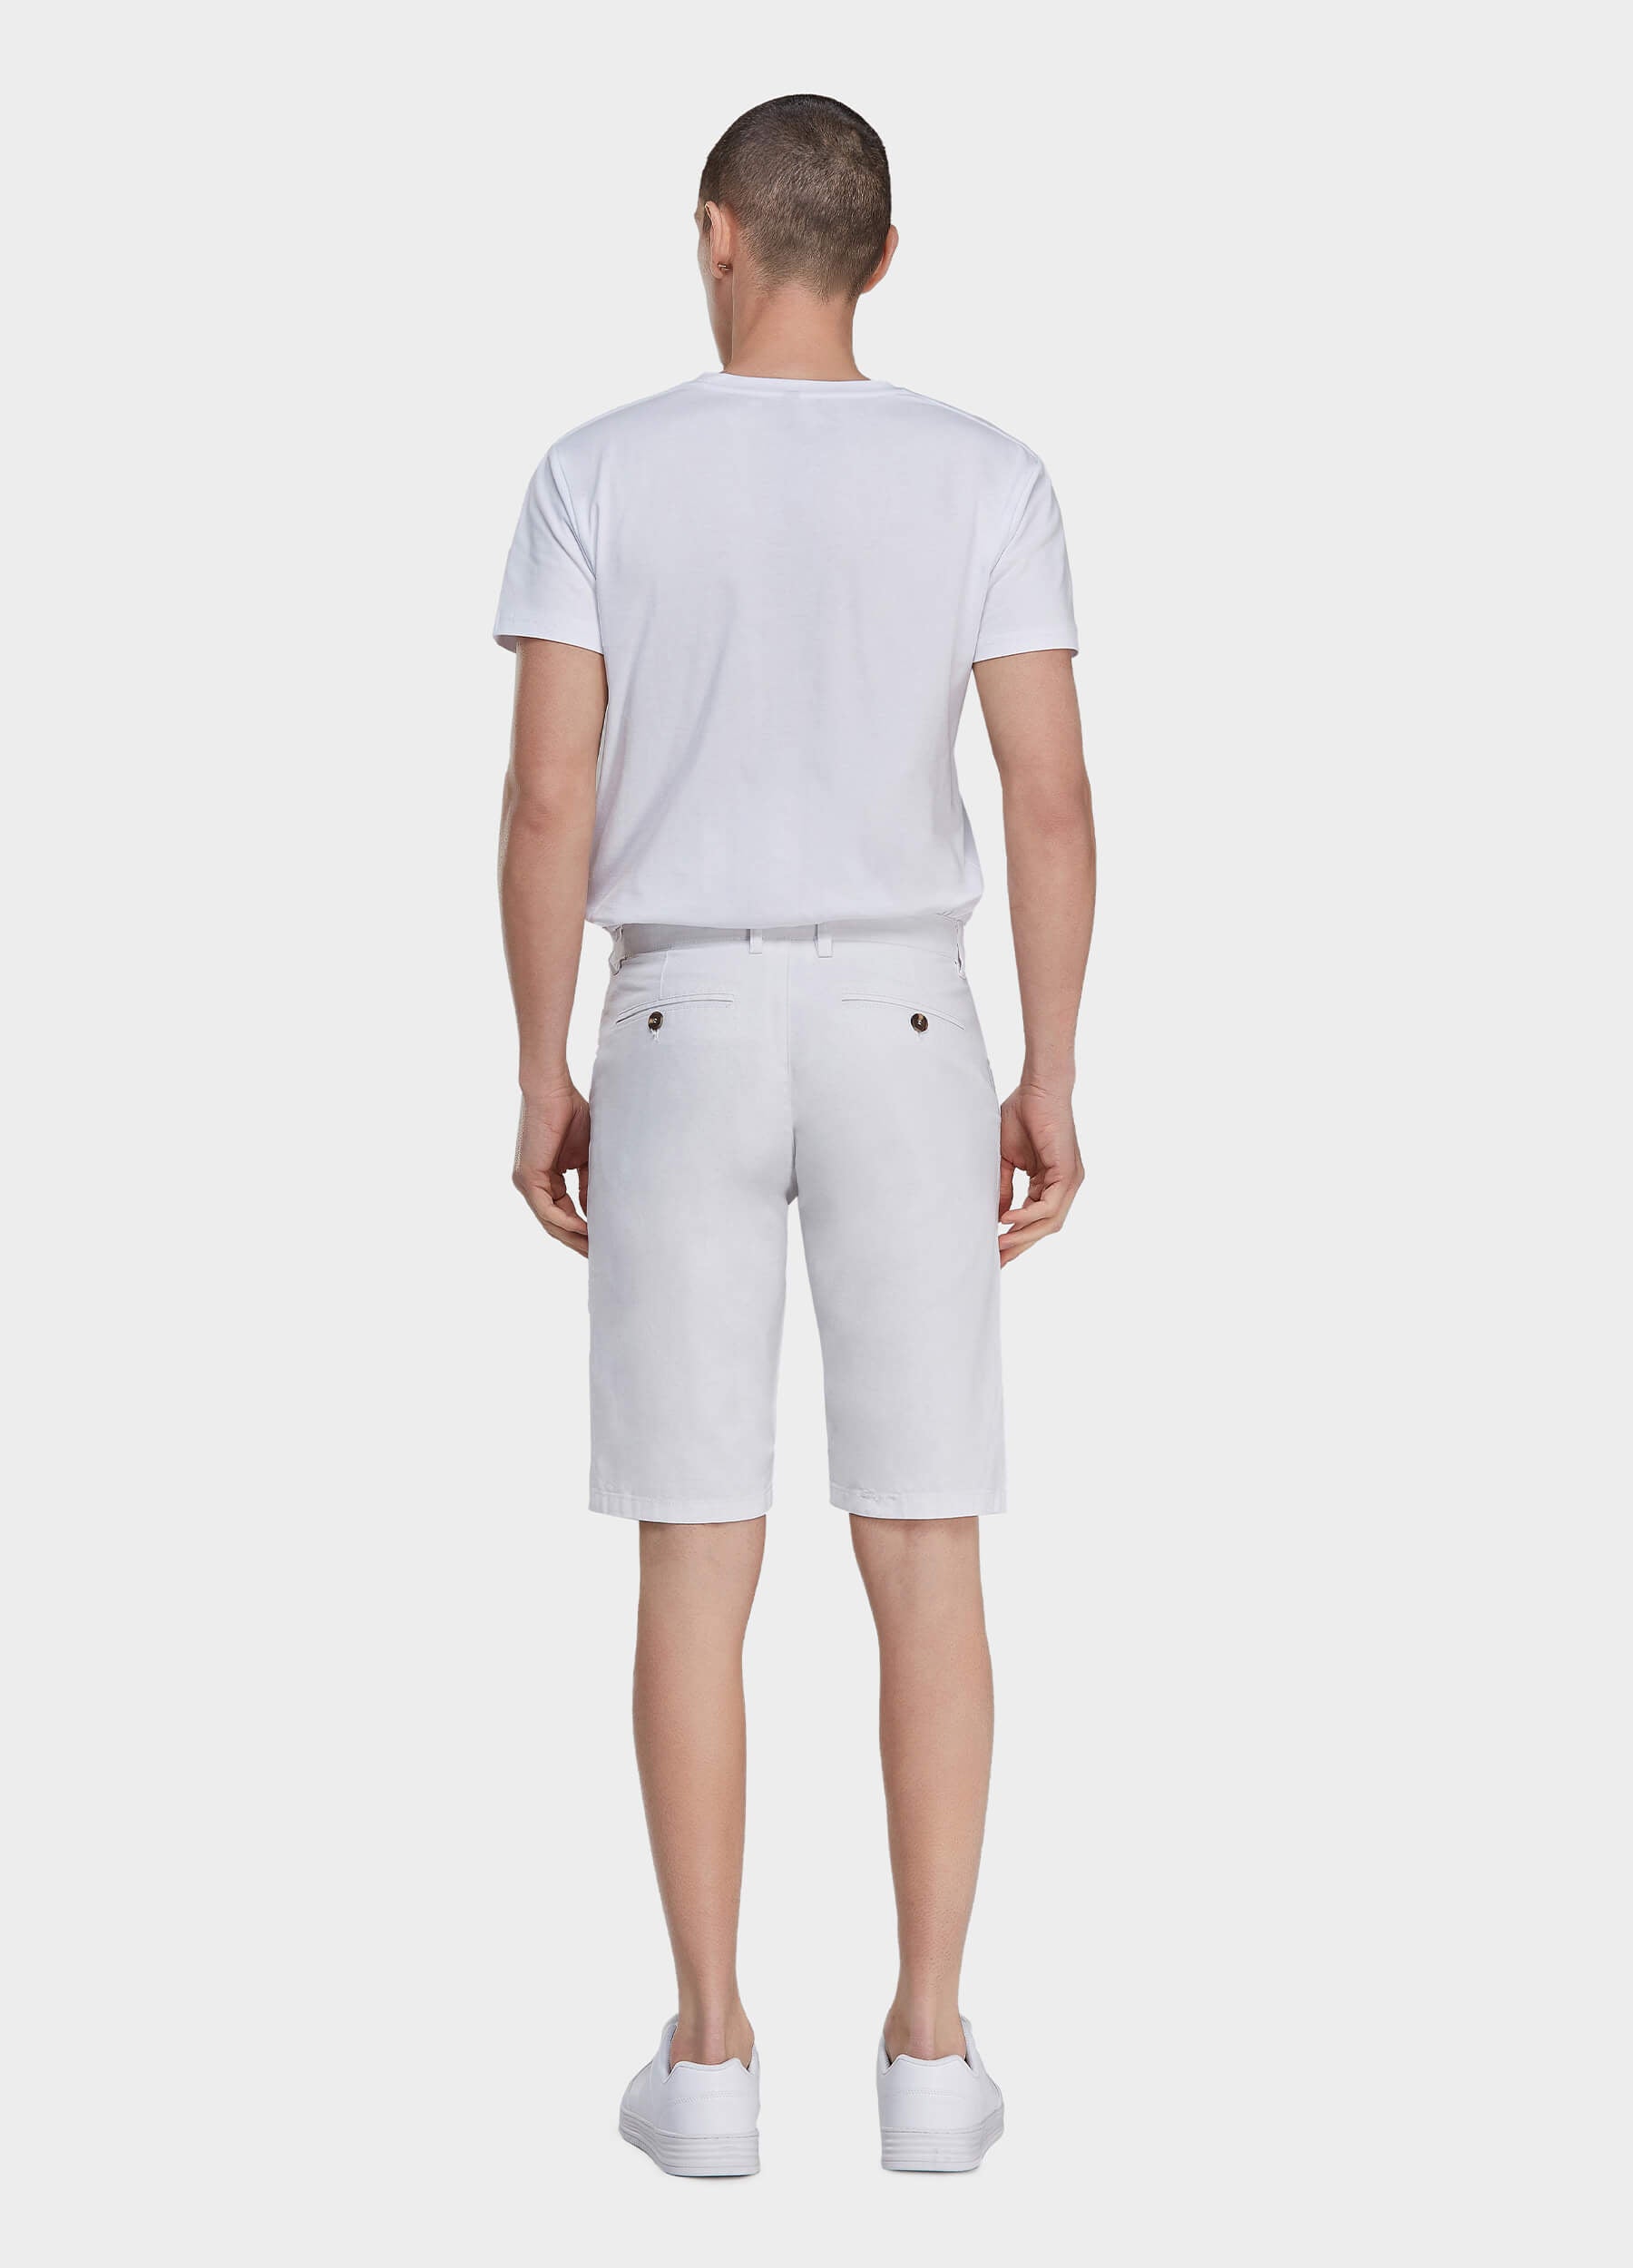 Men's Casual Zipper Fly Button Solid Shorts with Slant Pocket-White backview